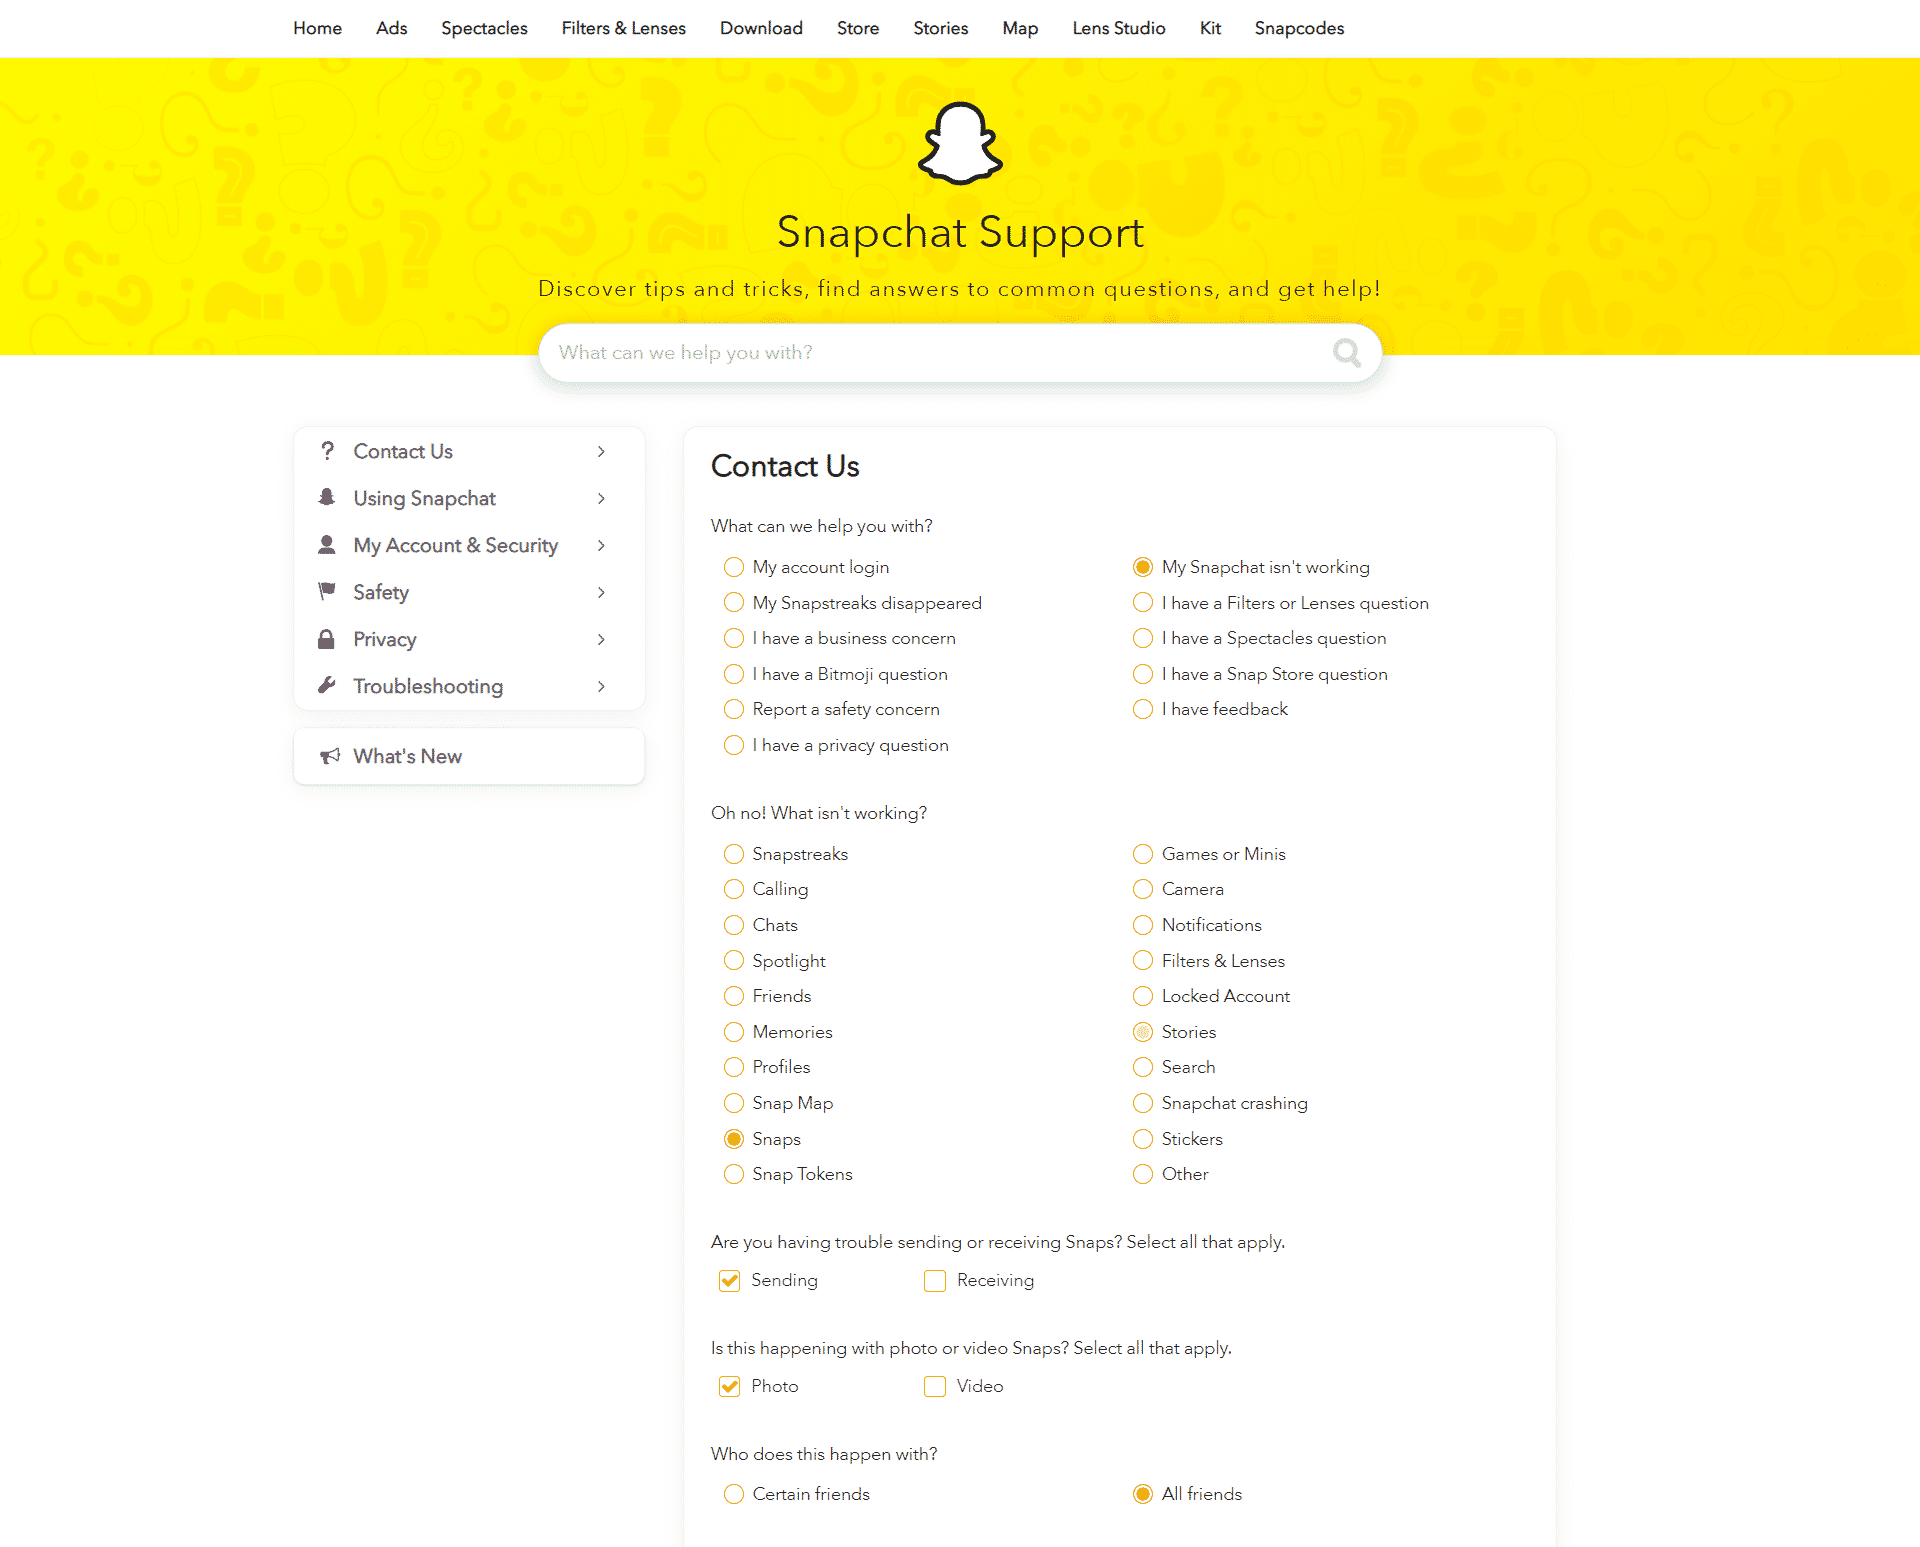 snap score not working on Snapchat